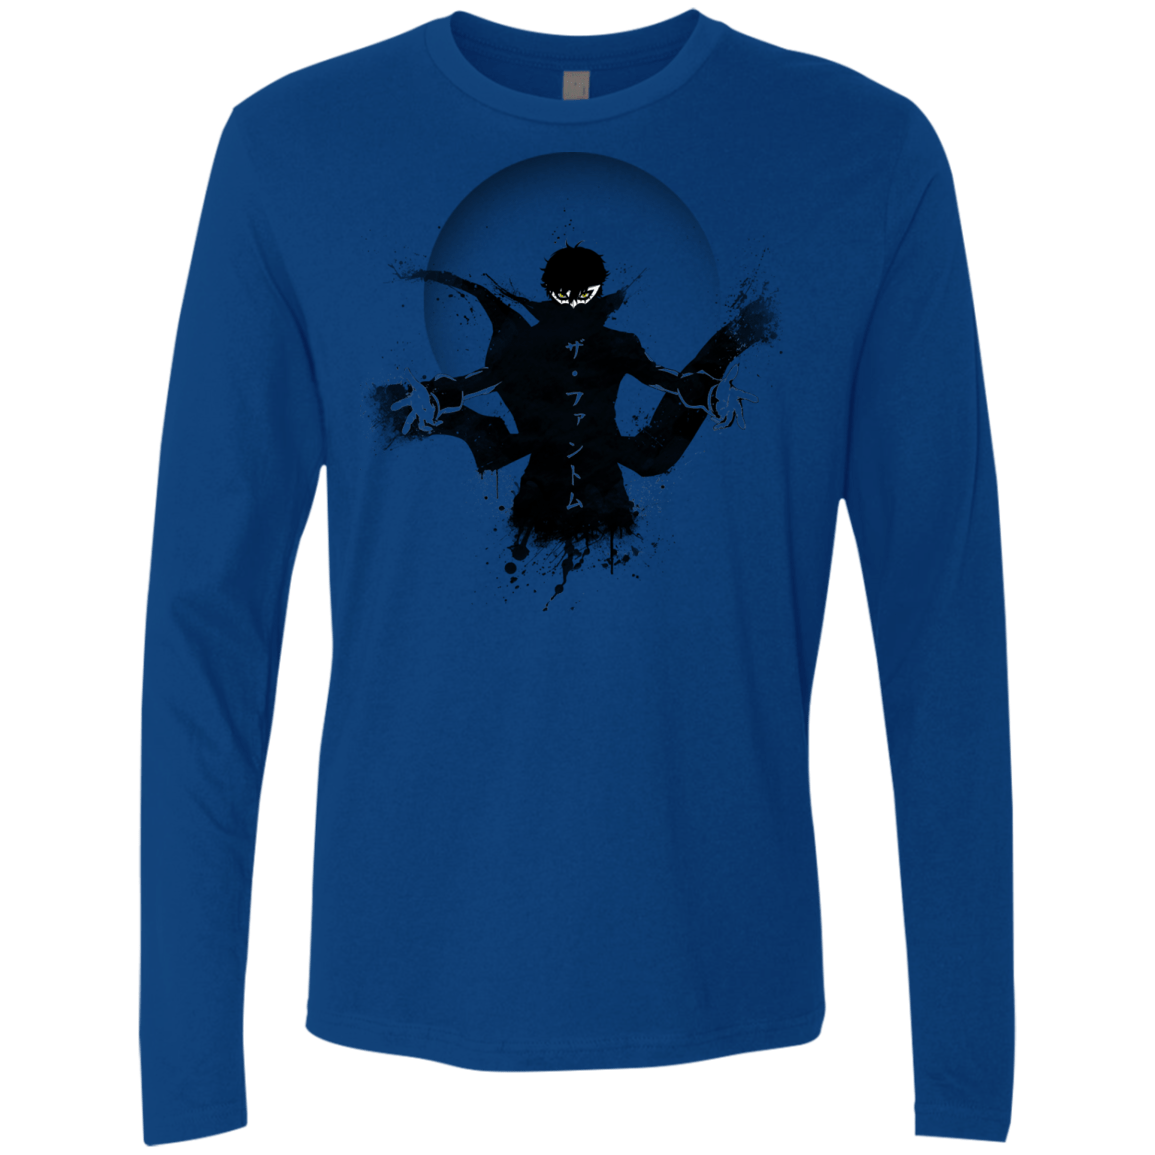 Wake Up, Get Up, Get Out There Men's Premium Long Sleeve